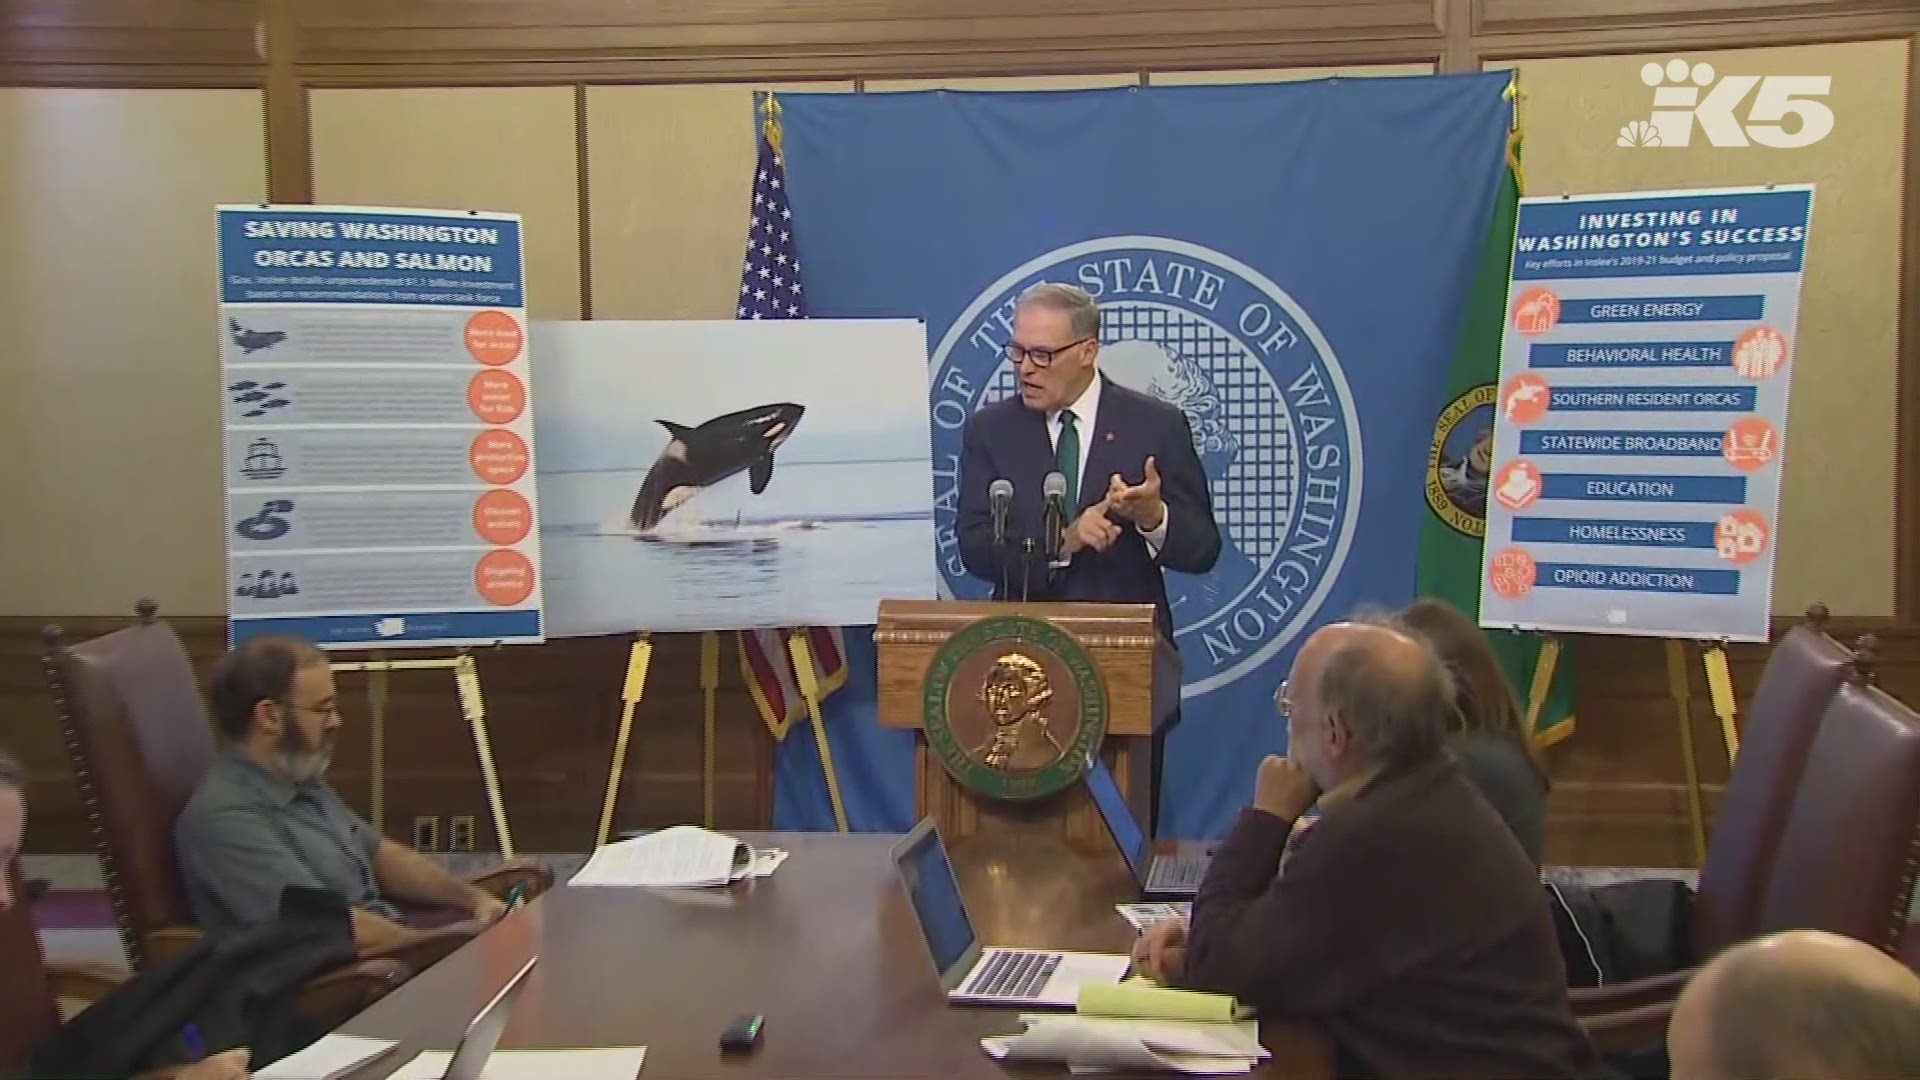 While detailing his budget plan, Governor Inslee discussed potentially effective measures for dealing with homelessness, mental illness and opioid addiction.